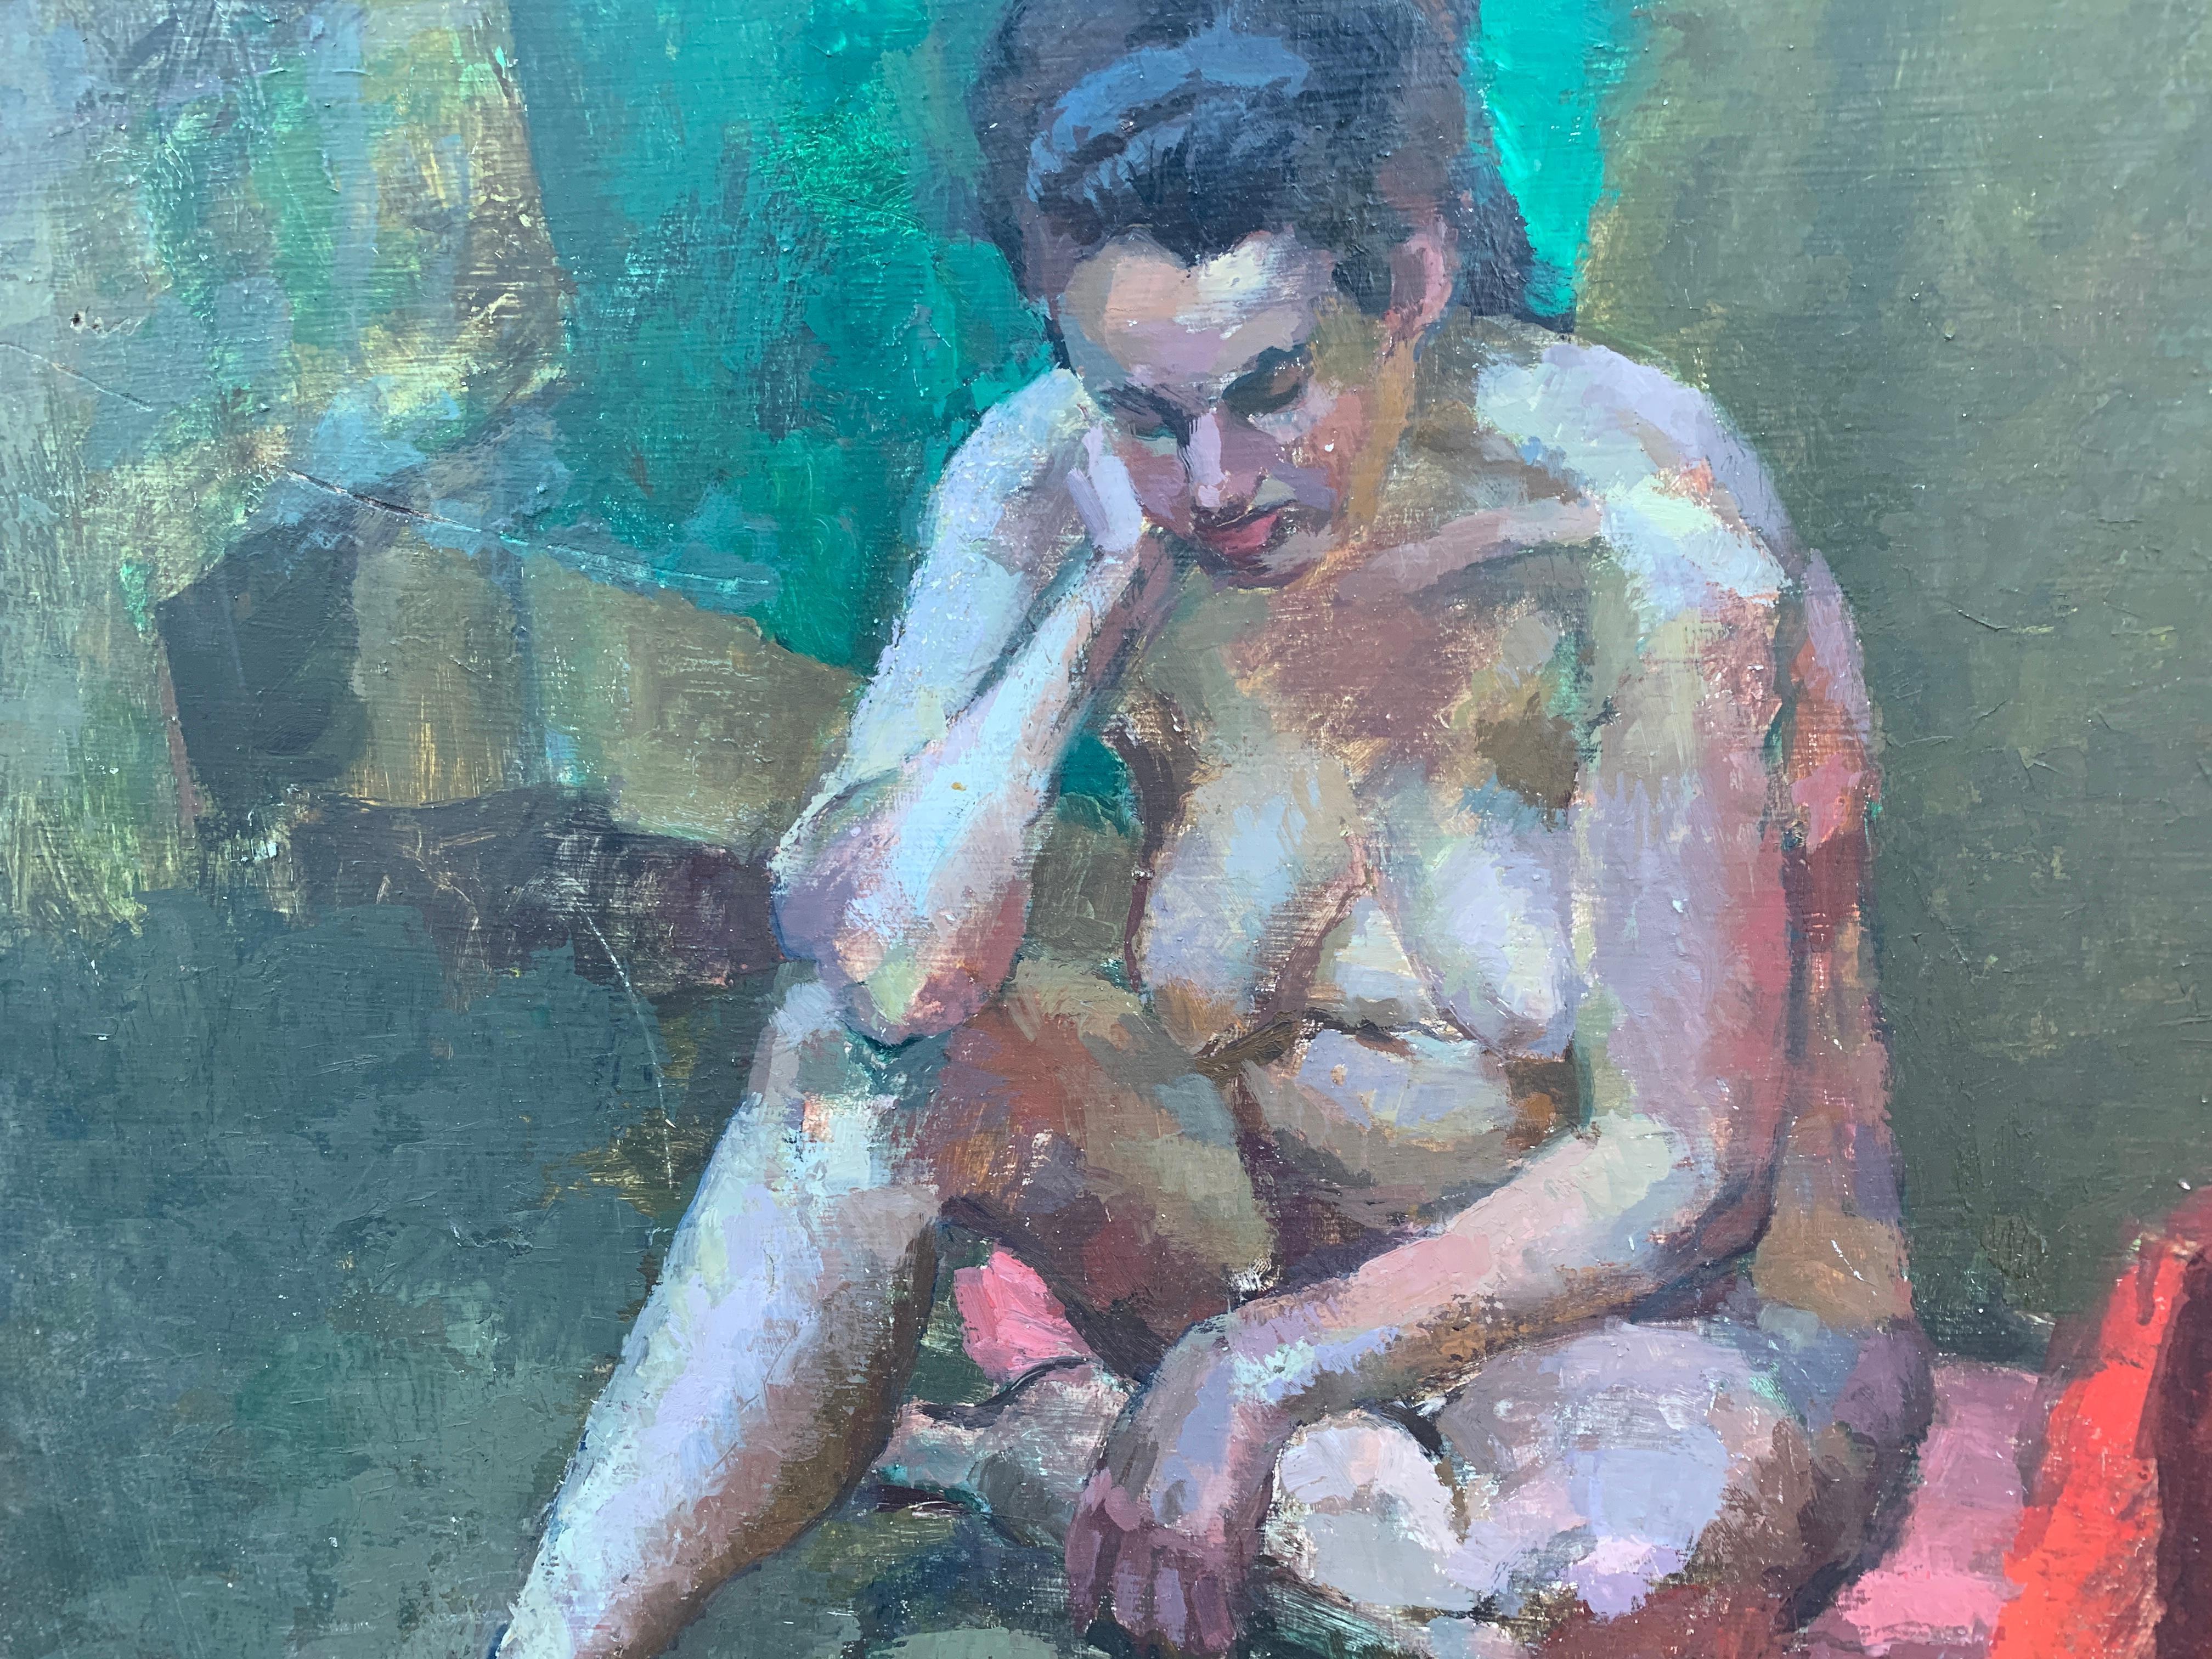 1950's Mid Century modern oil portrait of a nude woman seated reading in an interior.

The artist was a portrait and figure painter active during the 1950s-1960s

Great use of color and abstract brush strokes.

Oils on artists board

From a private